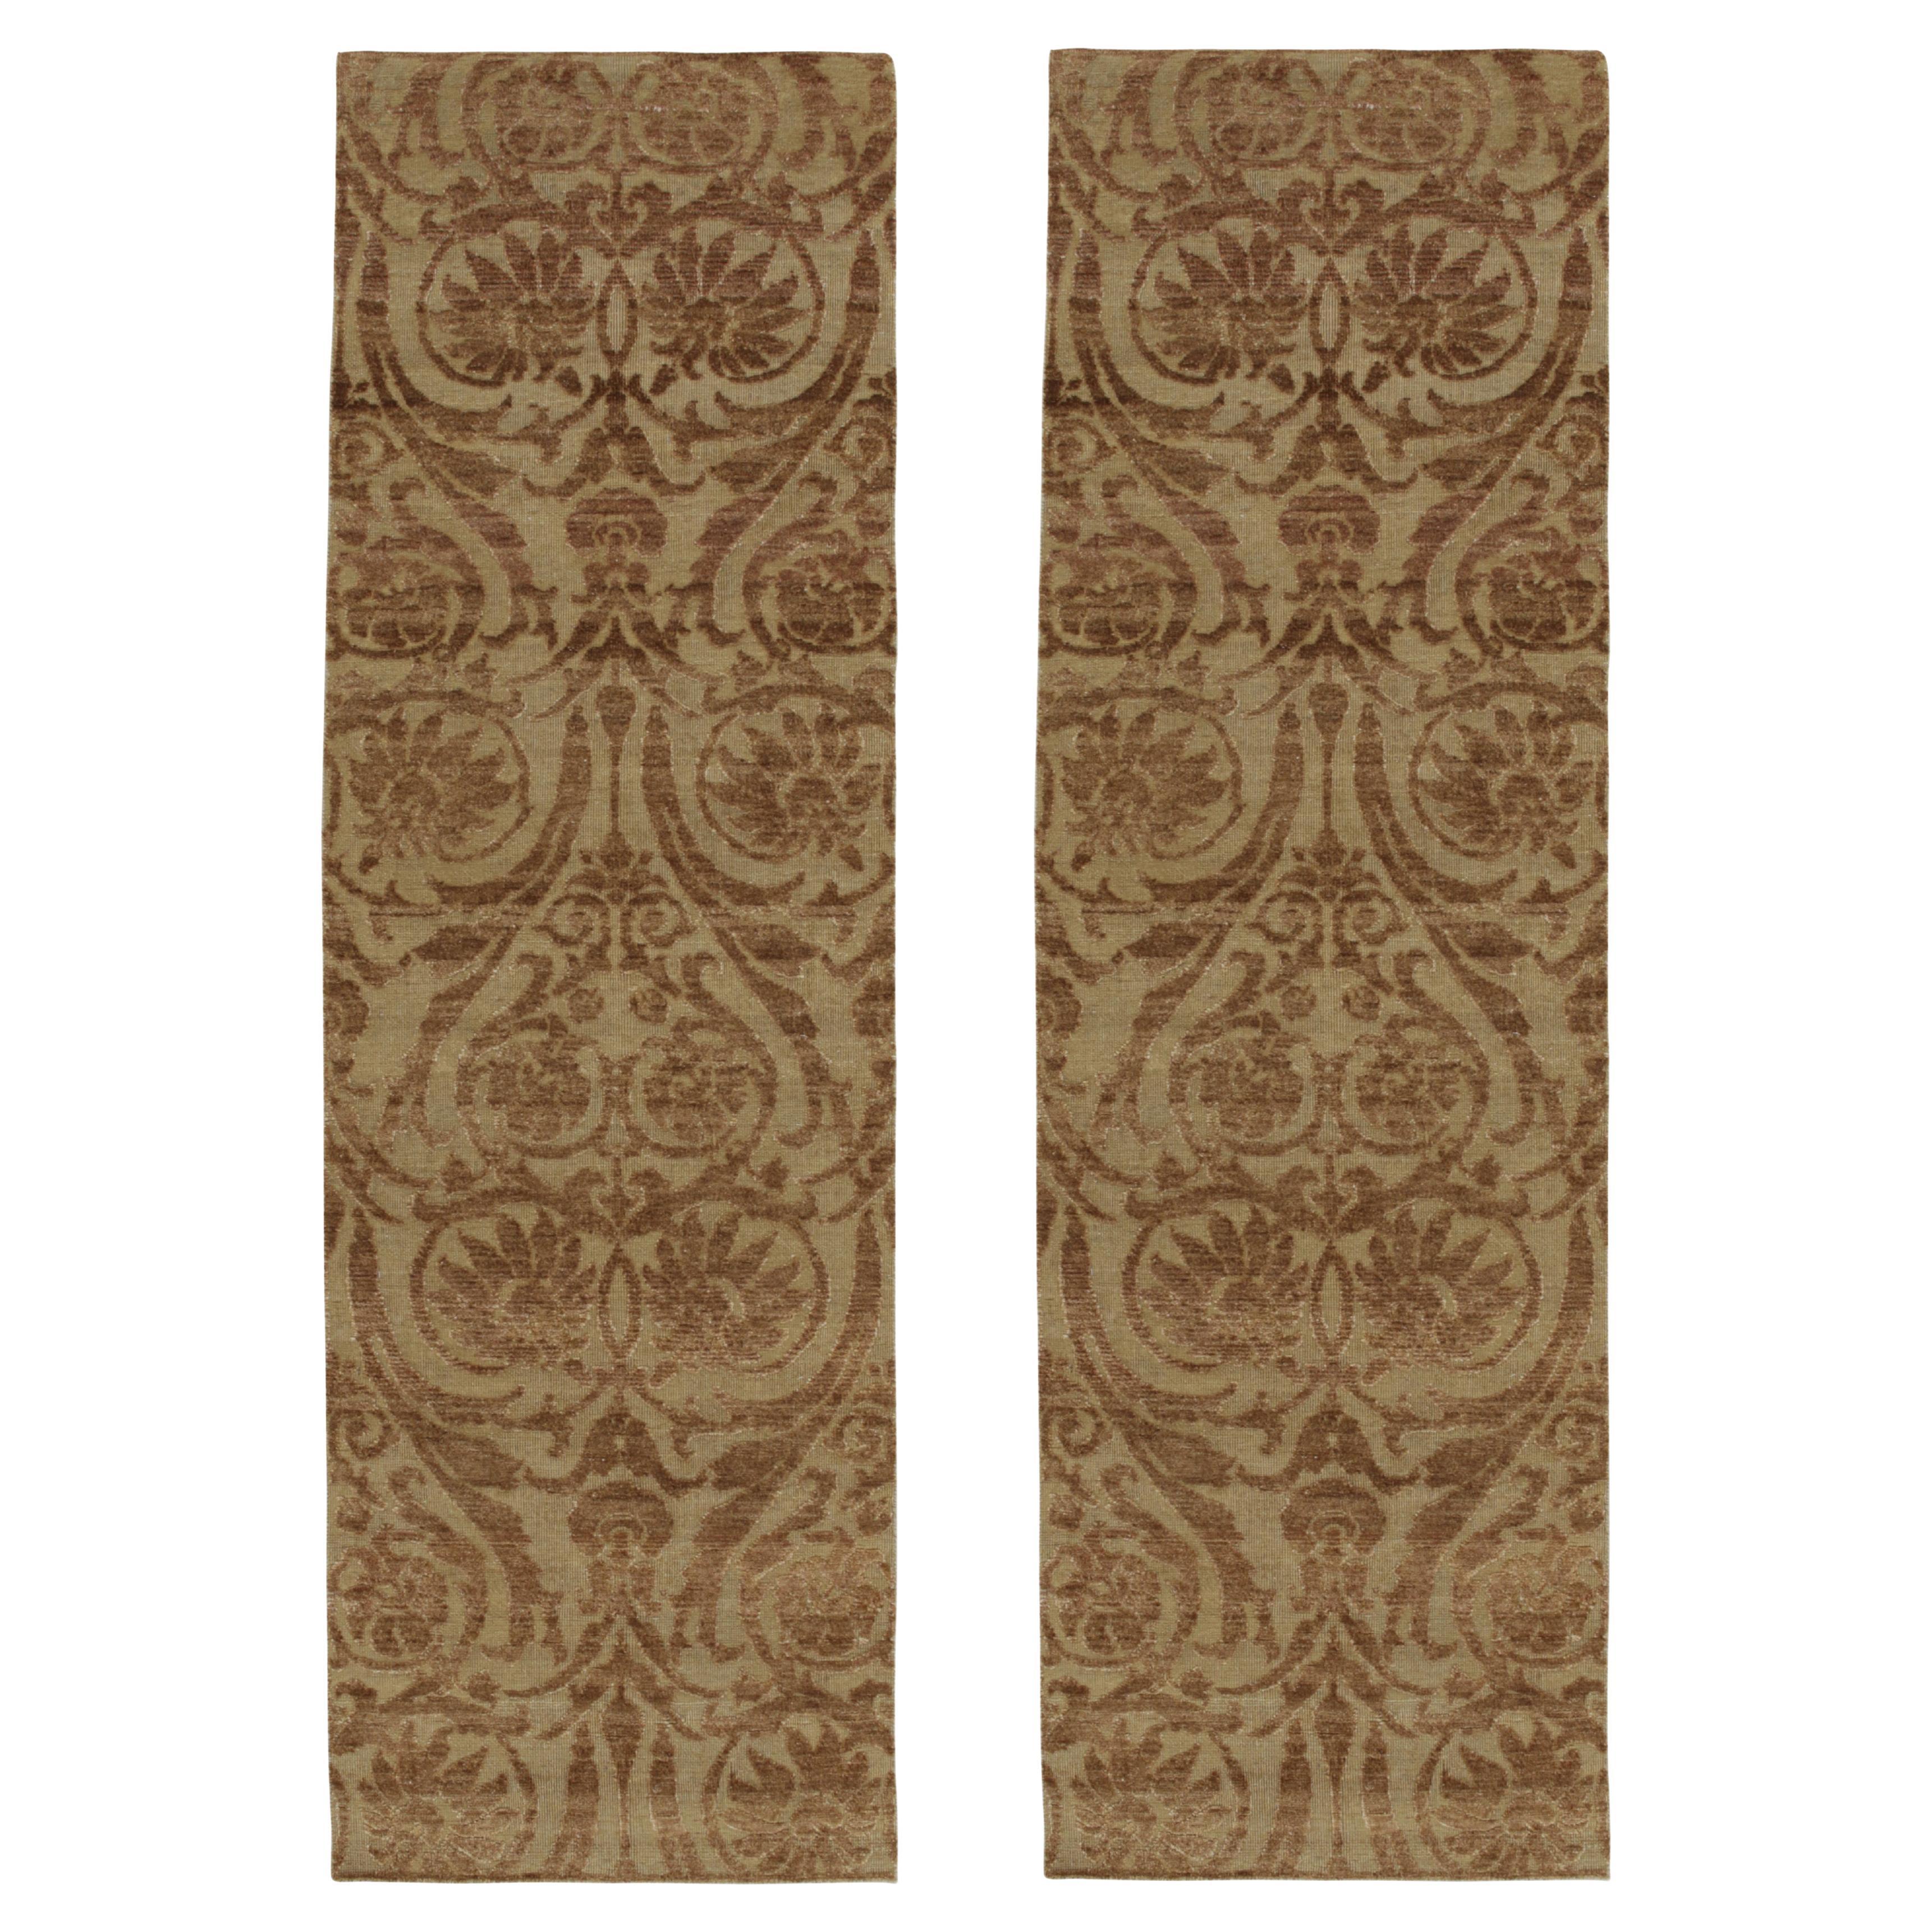 Rug & Kilim’s European Style Twin Runners in Beige with Brown Floral Patterns